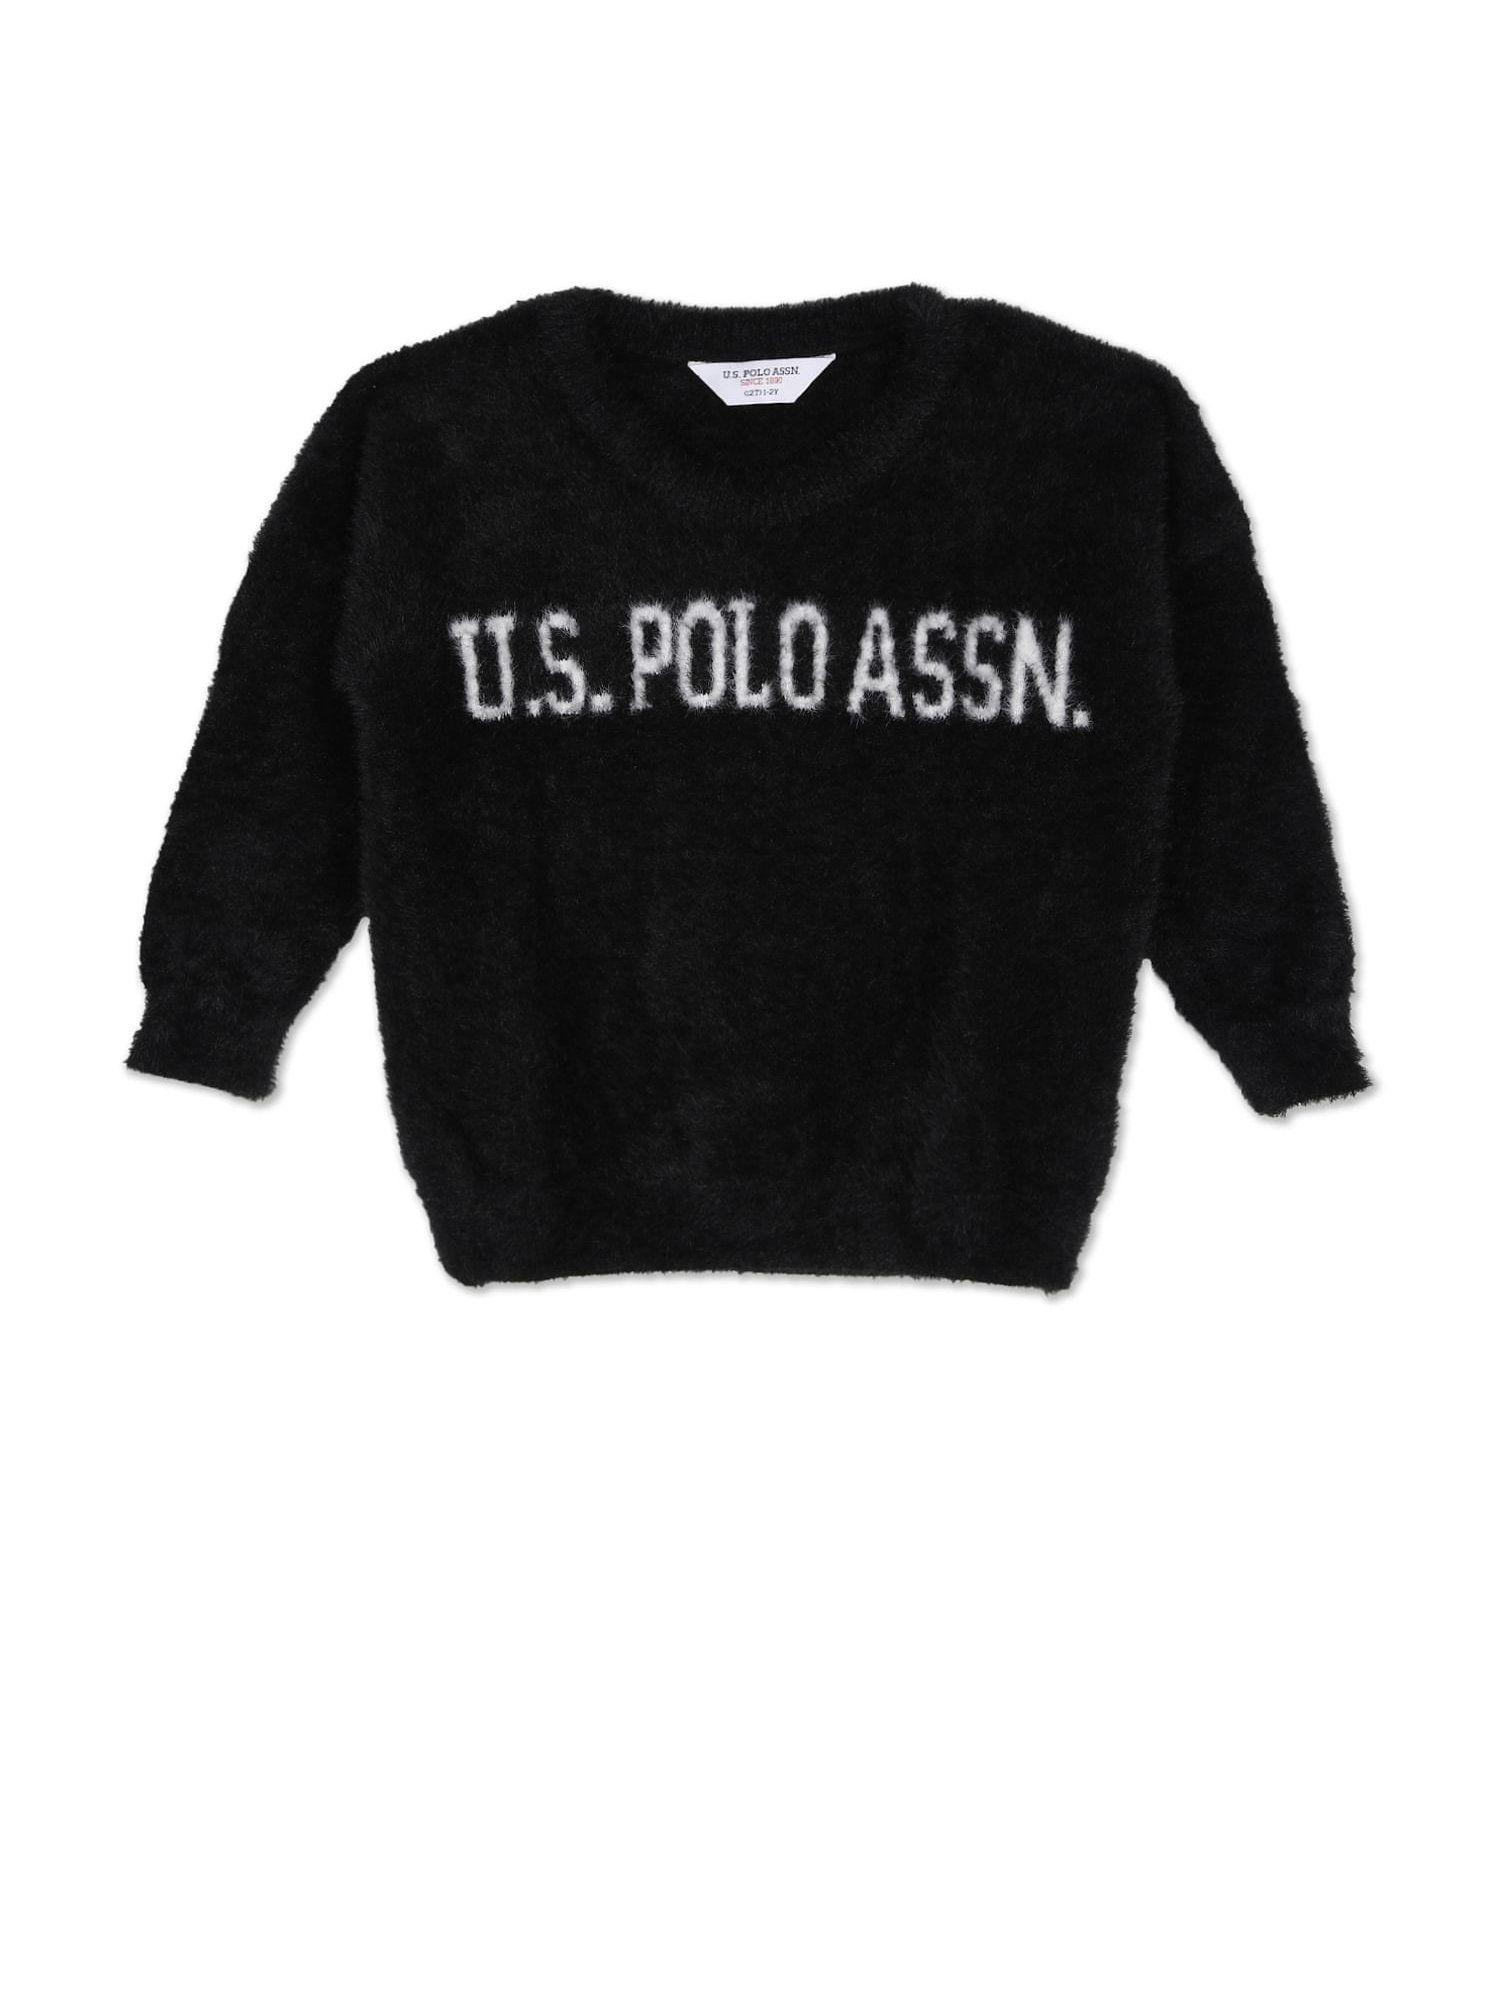 Girls Black Crew Neck Patterned Knit Polyester Sweater